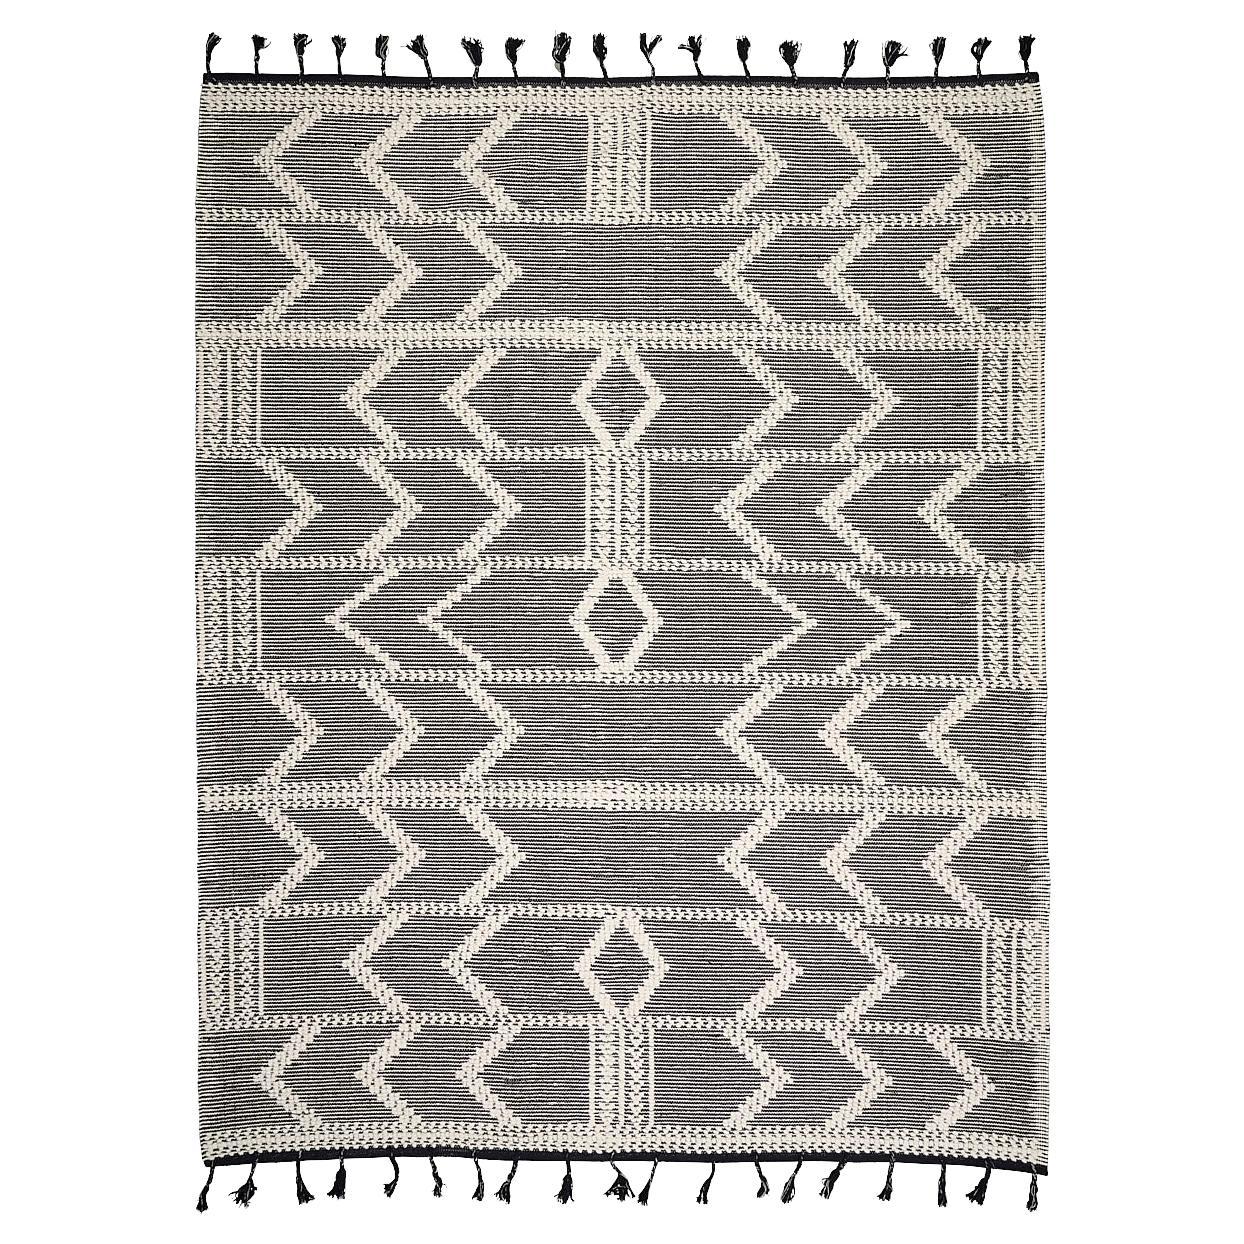 Schumacher Malta French Knot 5' x 7' Rug In Charcoal